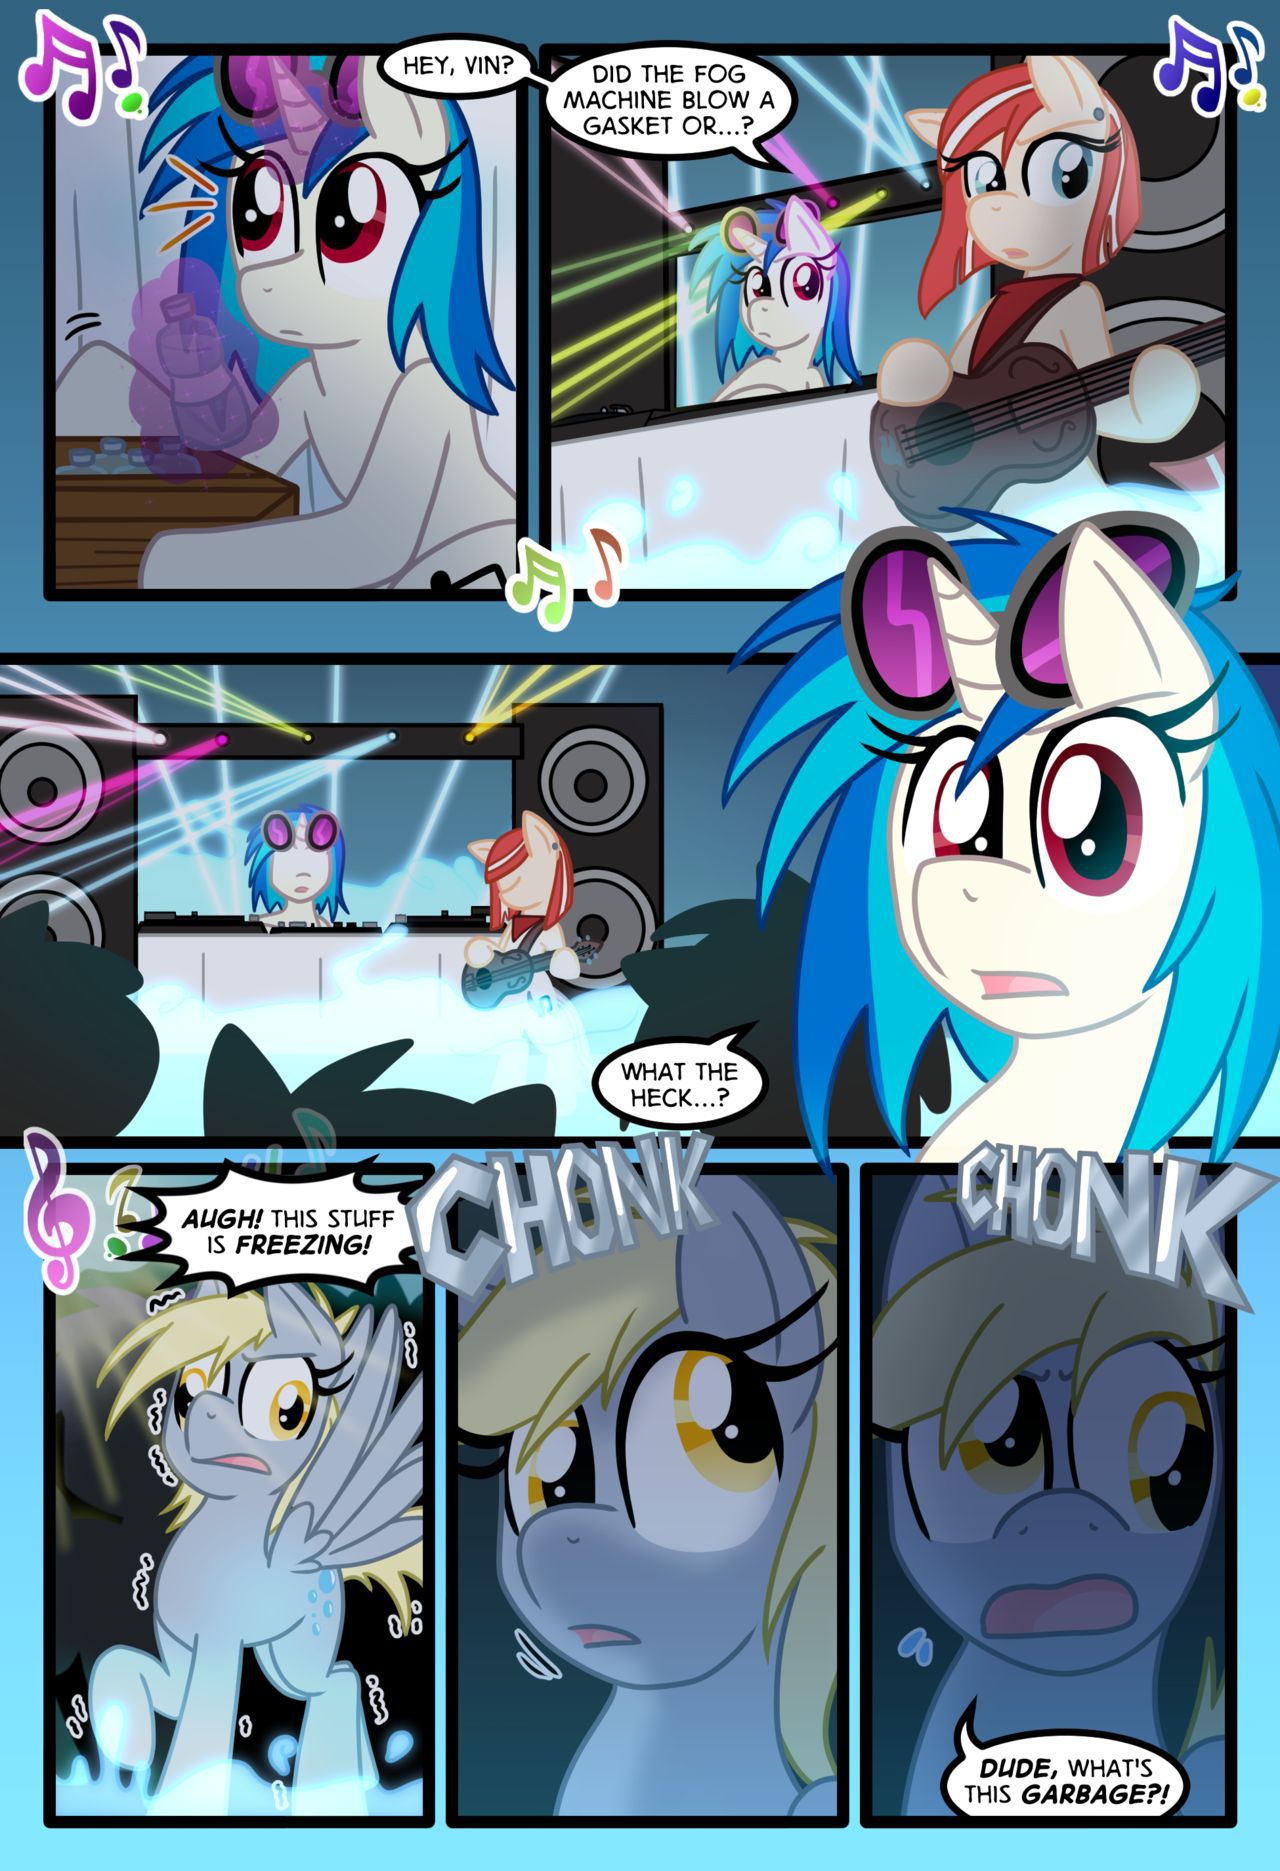 [Zaron] Lonely Hooves (My Little Pony Friendship Is Magic) [Ongoing] 108